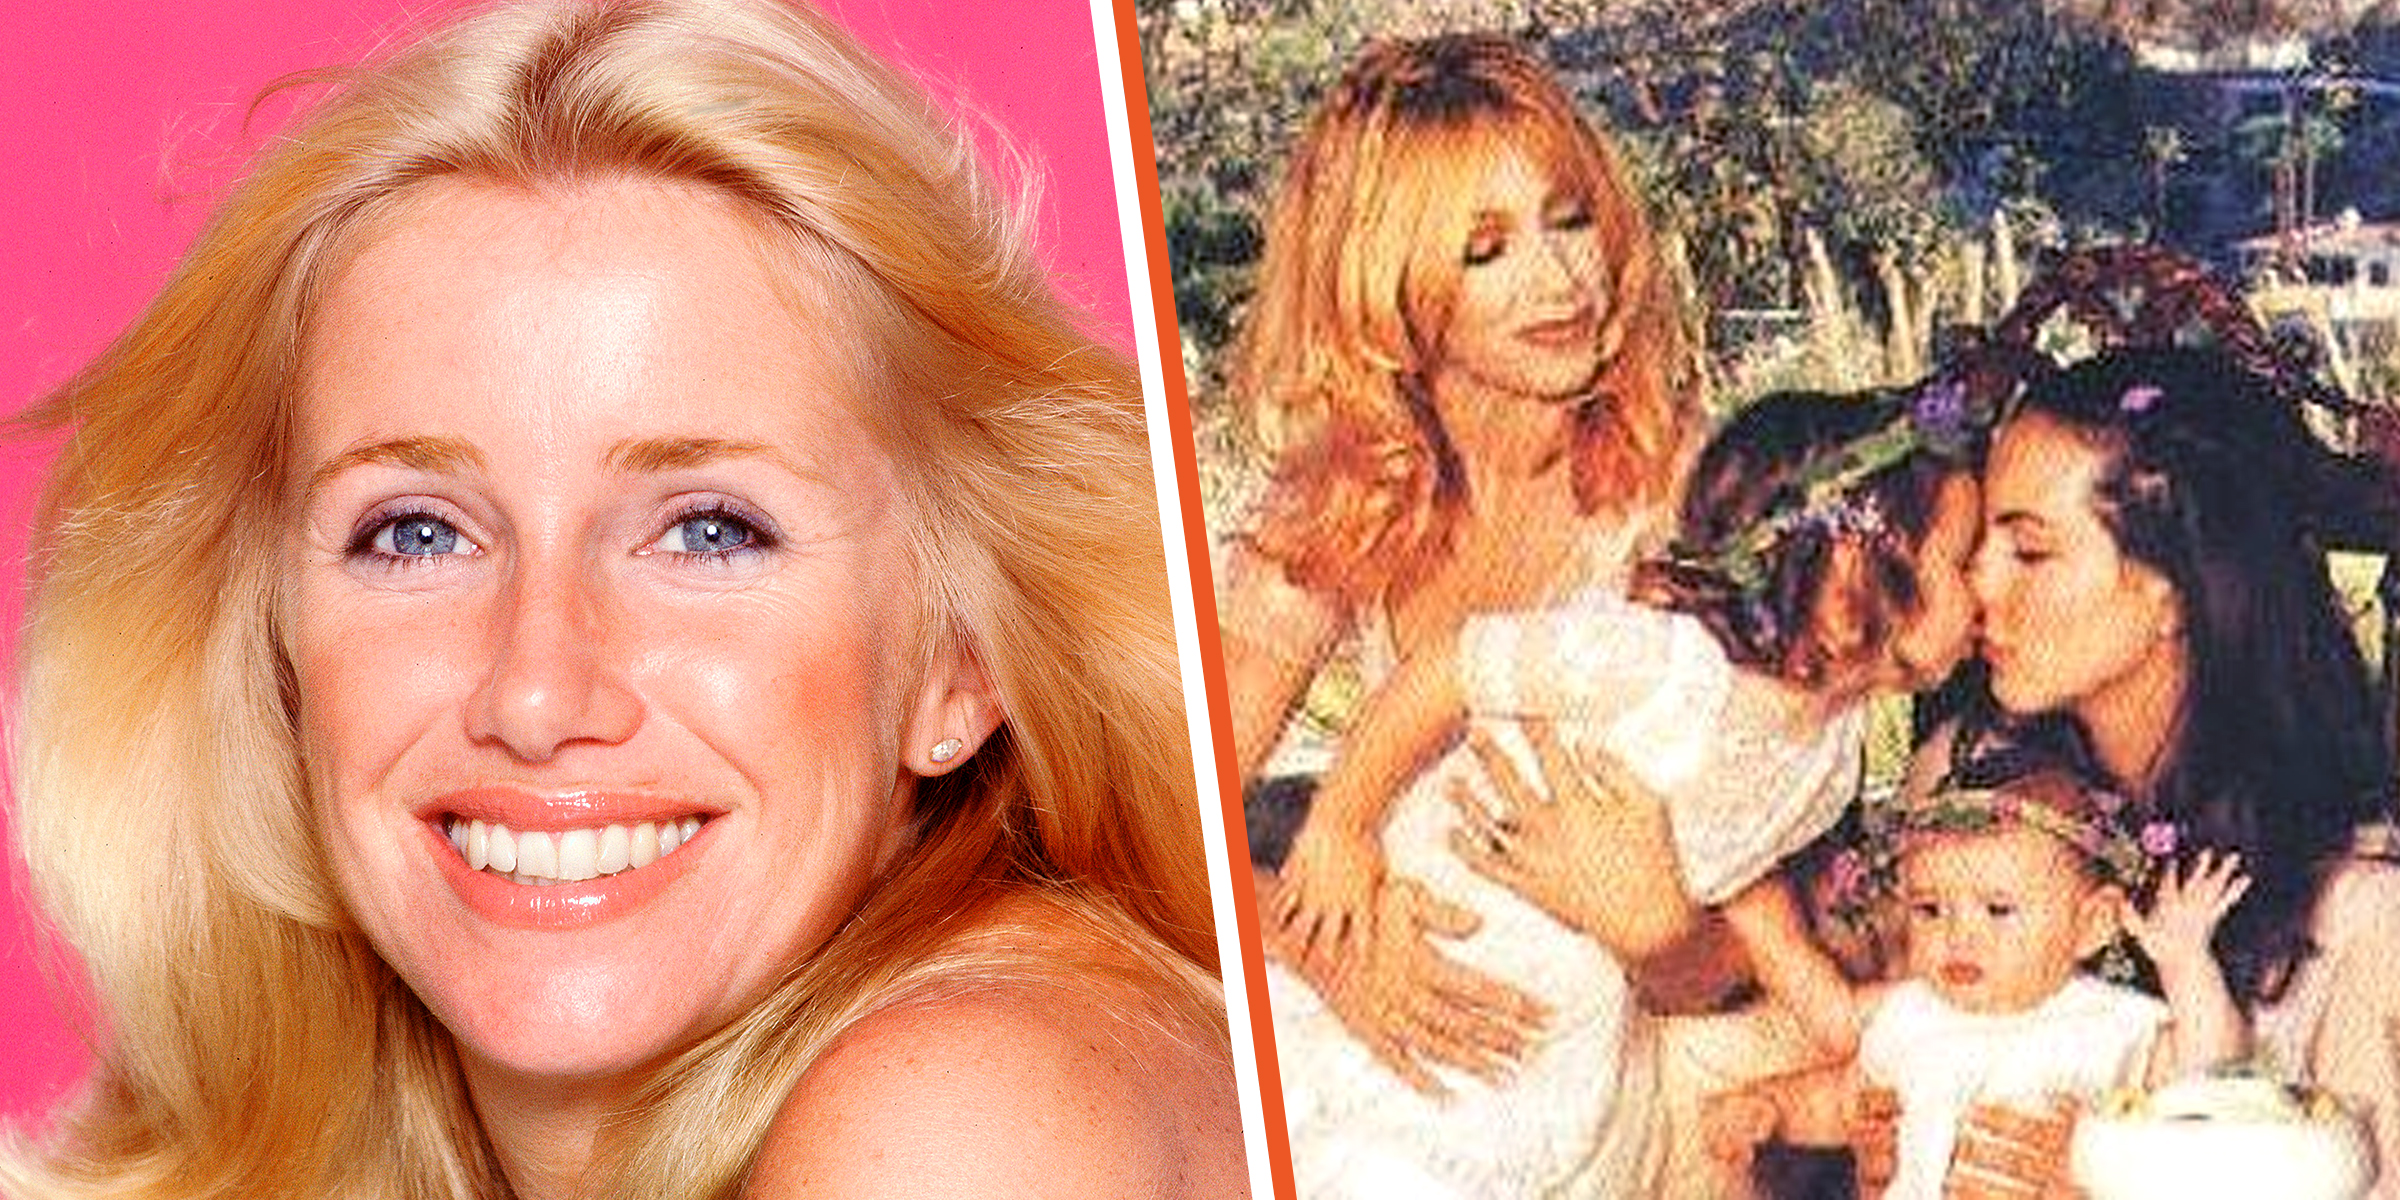 Suzanne Somers, 1977 | Suzanne Somers, Caroline Somers, Camelia Somers, and a Third Child, 2016 | Source: Facebook.com/caaamel | Getty Images